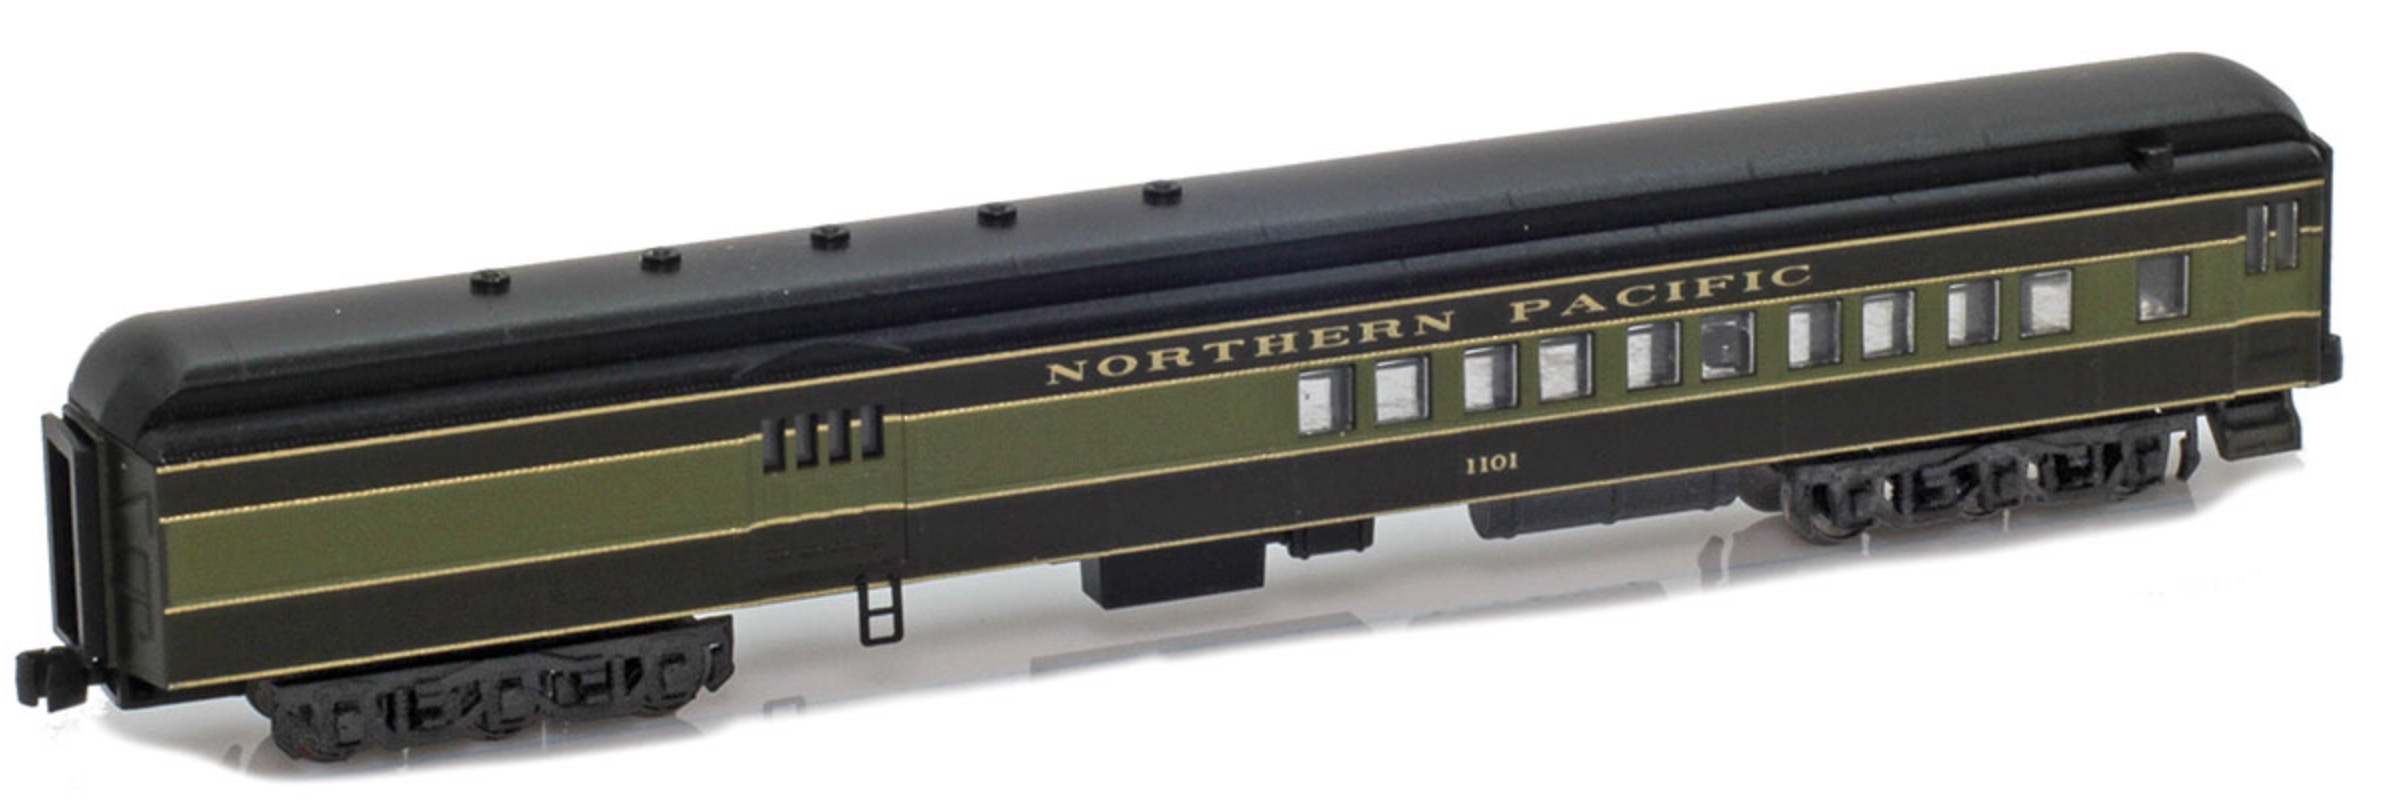 Z Scale - AZL - 74033-1 - Passenger Car, Heavyweight, Combine - Northern Pacific - 1101